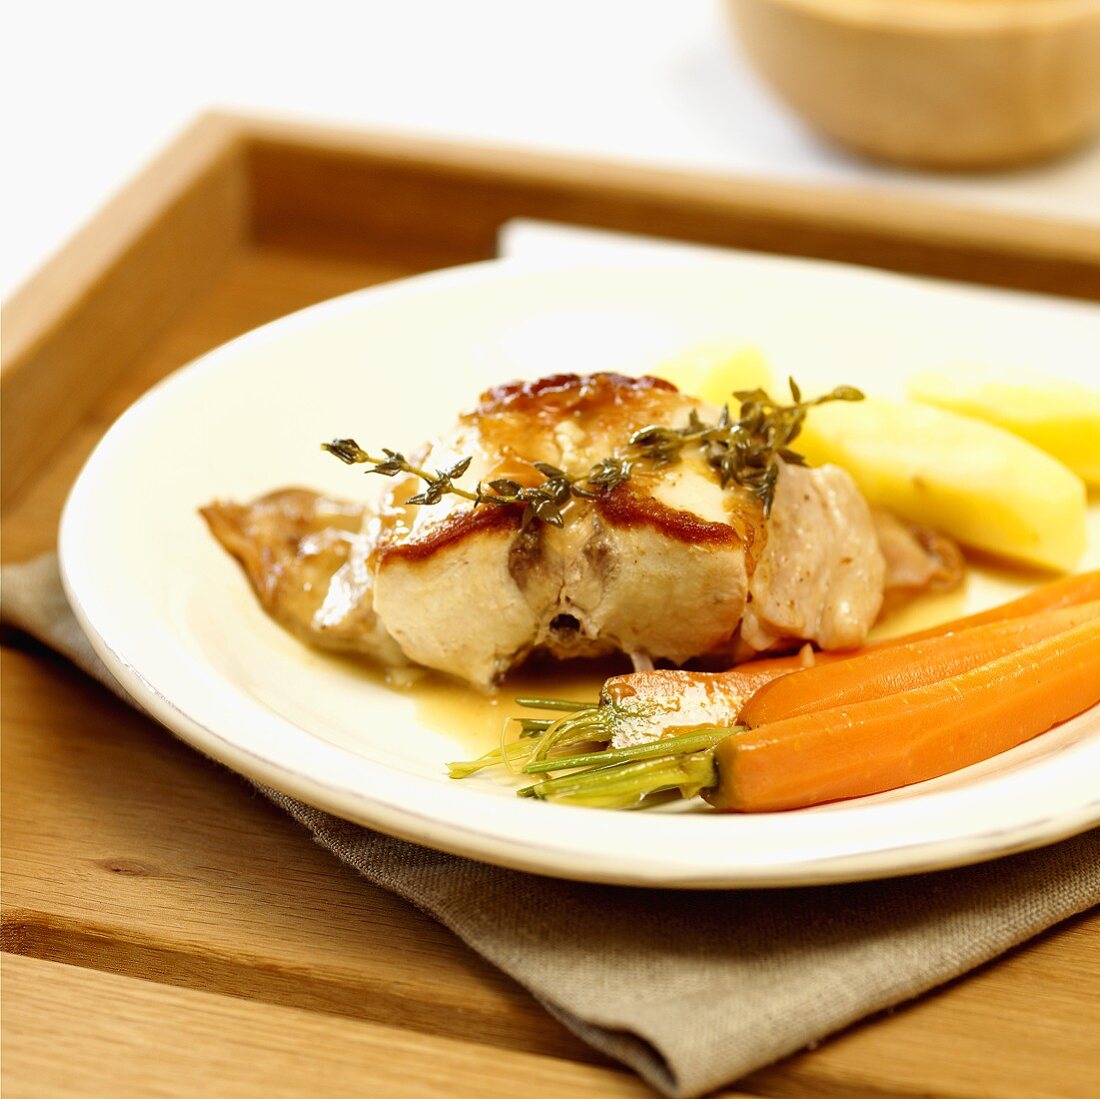 Saddle of rabbit with carrots and potatoes